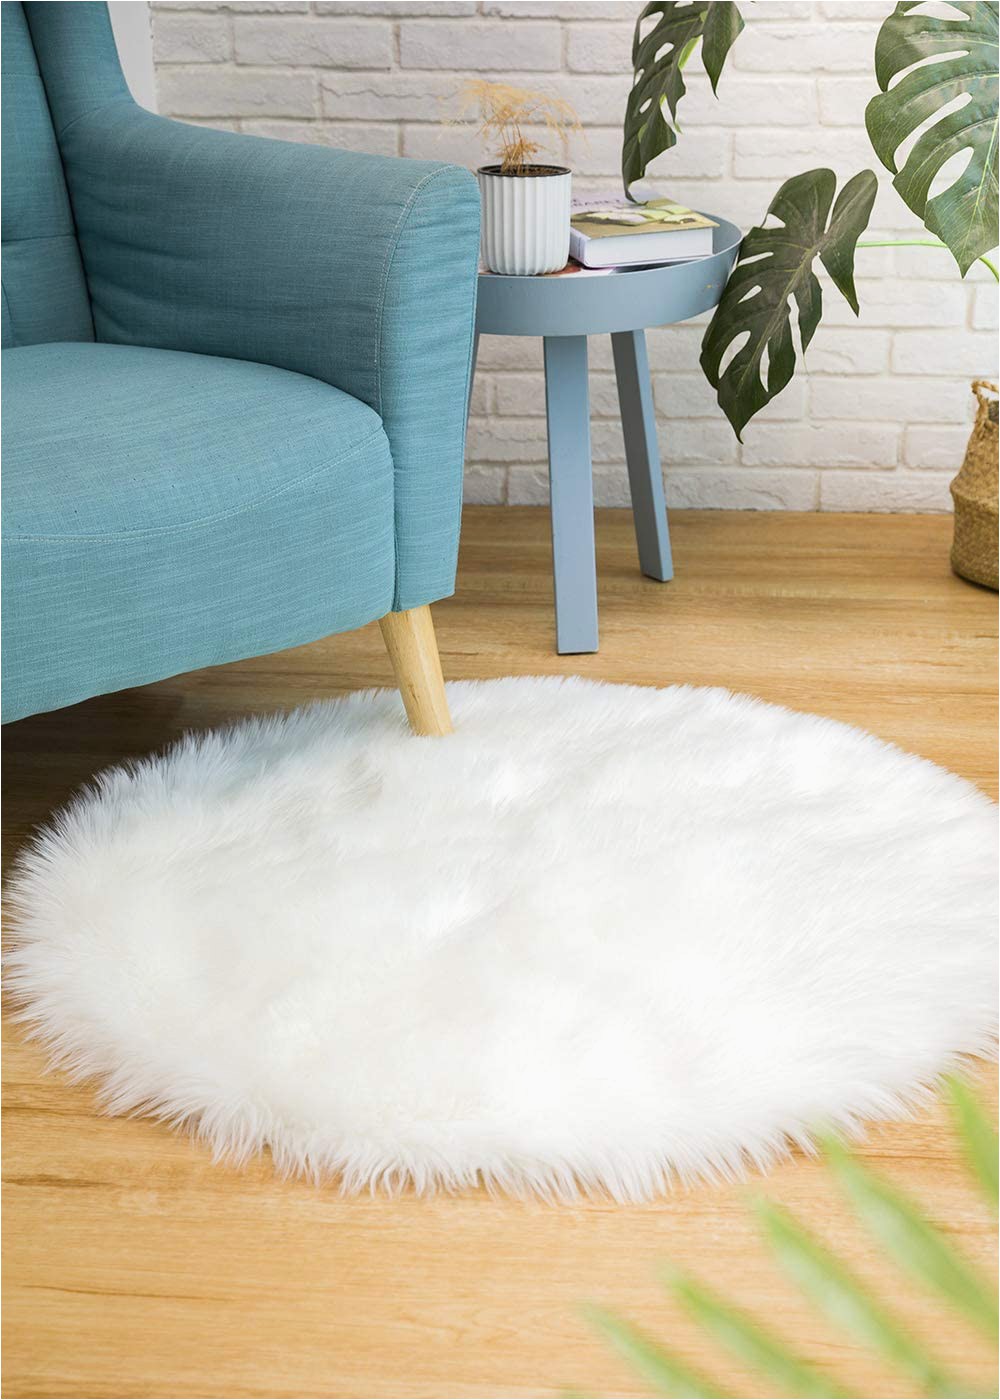 Black Faux Fur area Rug Ciicool soft Faux Sheepskin Fur area Rugs Round Fluffy Rugs for Bedroom Silky Fuzzy Carpet Furry Rug for Living Room Girls Rooms White 3 X 3 Feet